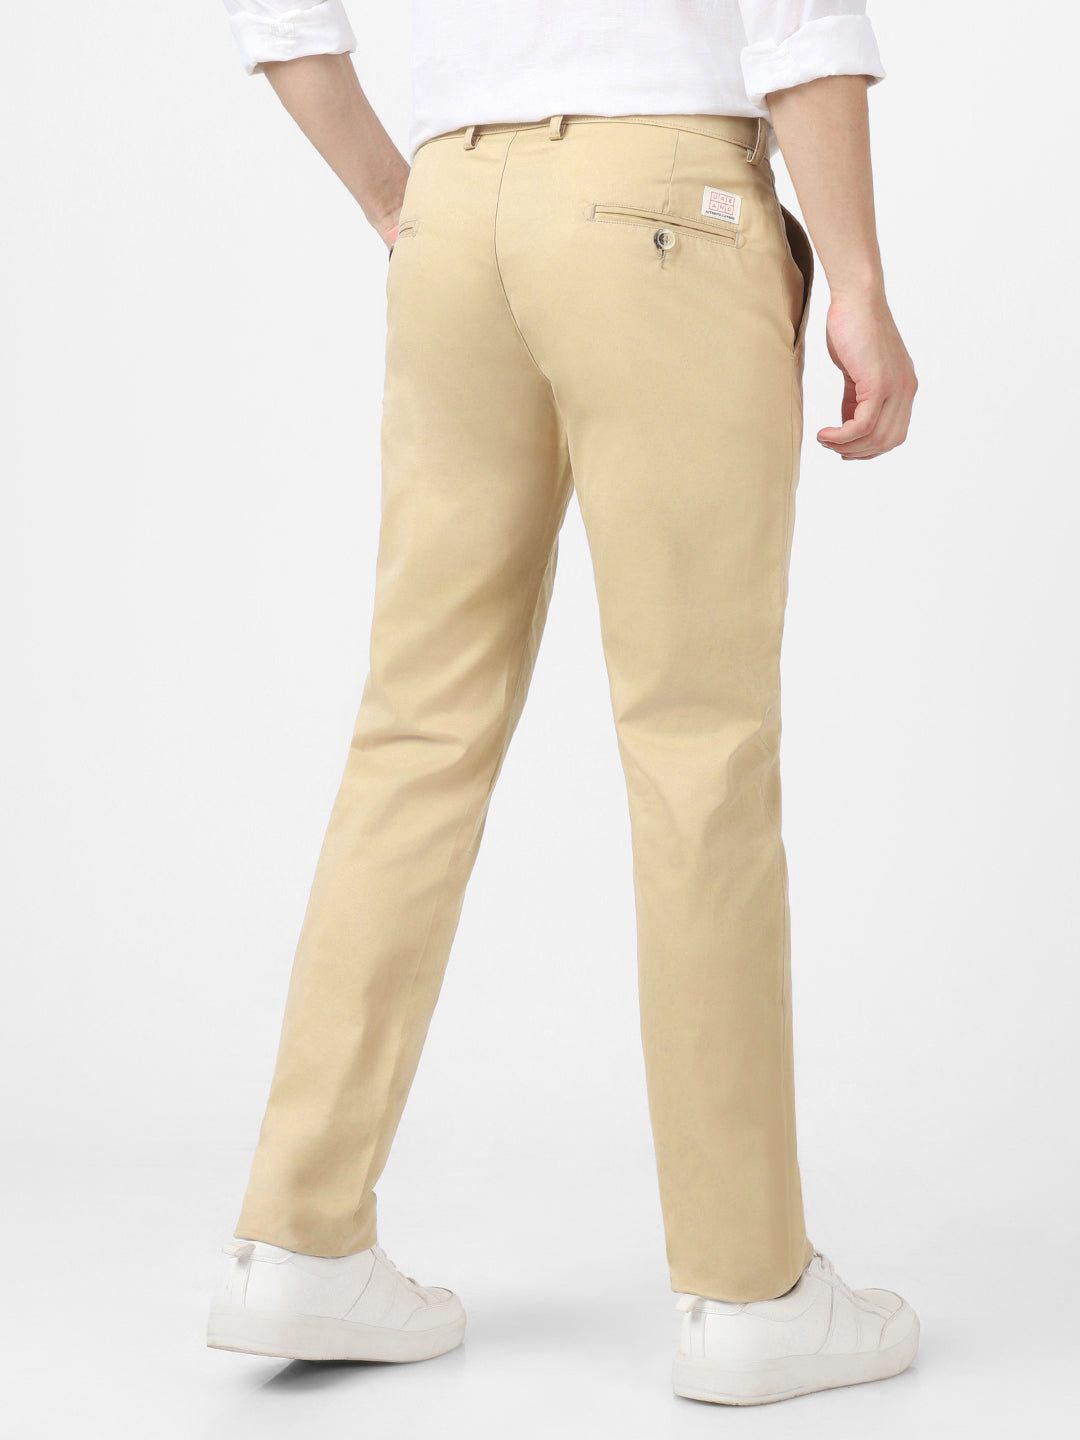 Men's Beige Cotton Slim Fit Casual Chinos Trousers Stretch